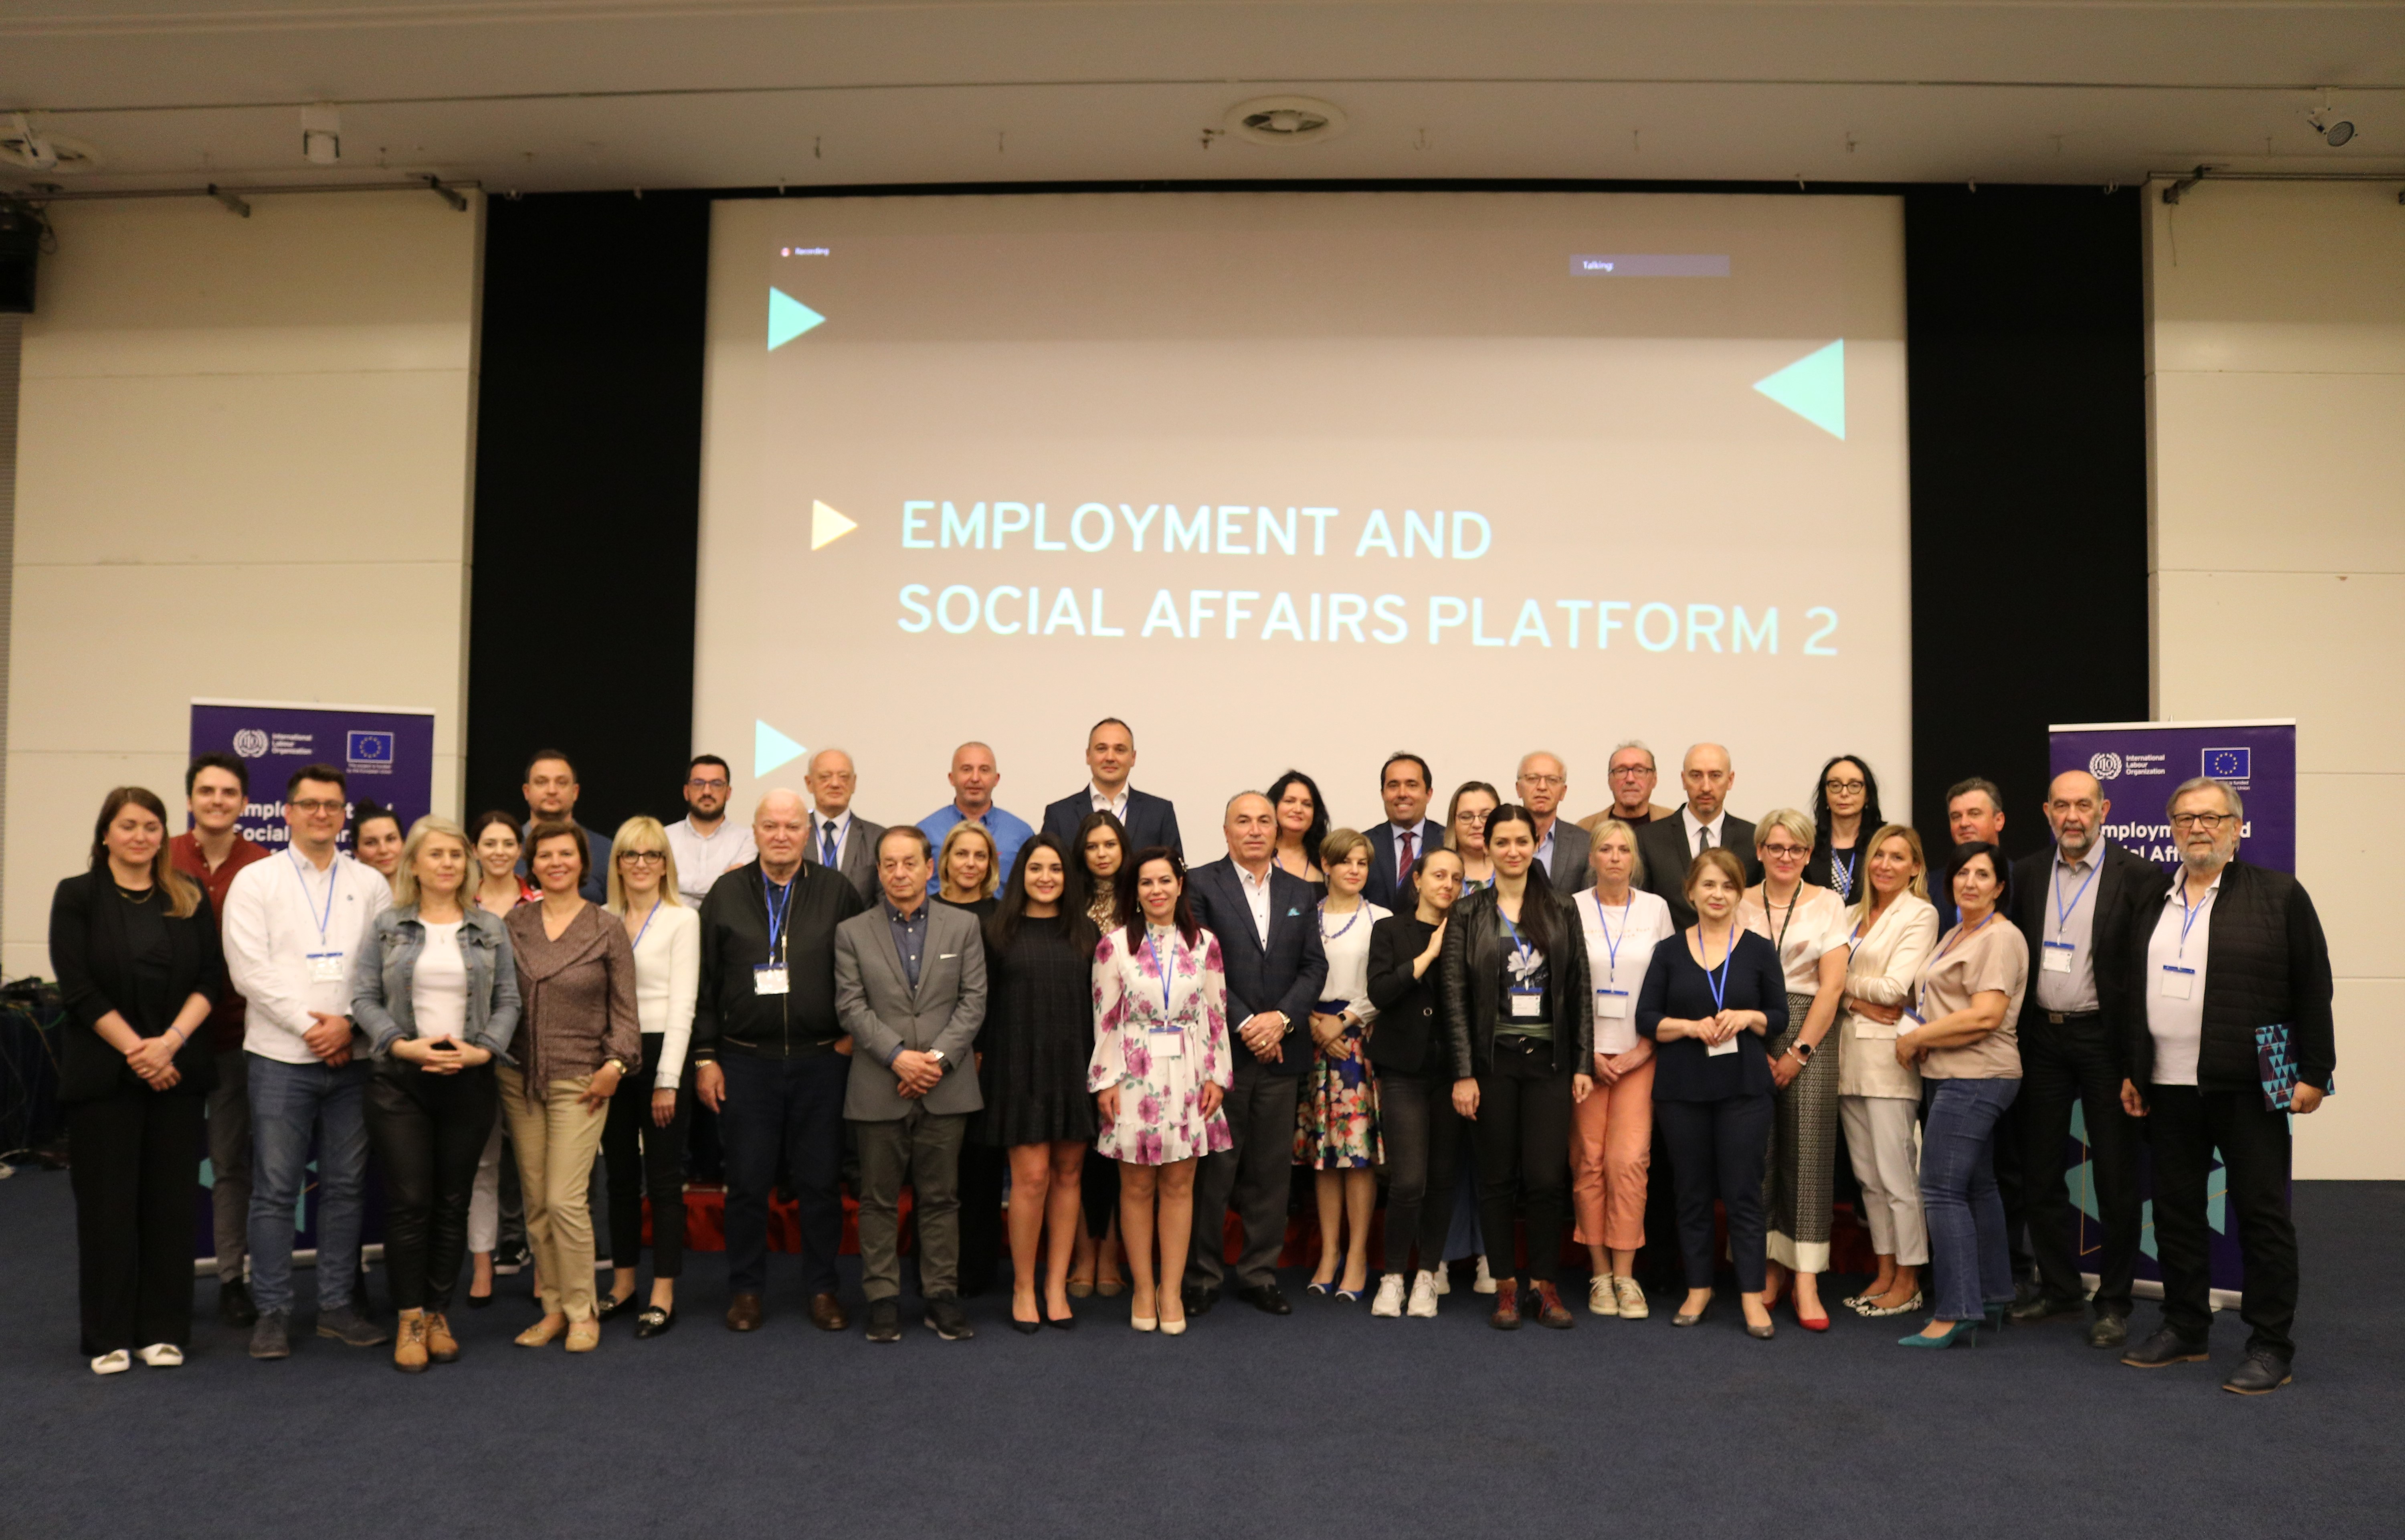 Participants of the Economic and Social councils' regional meeting in Montenegro